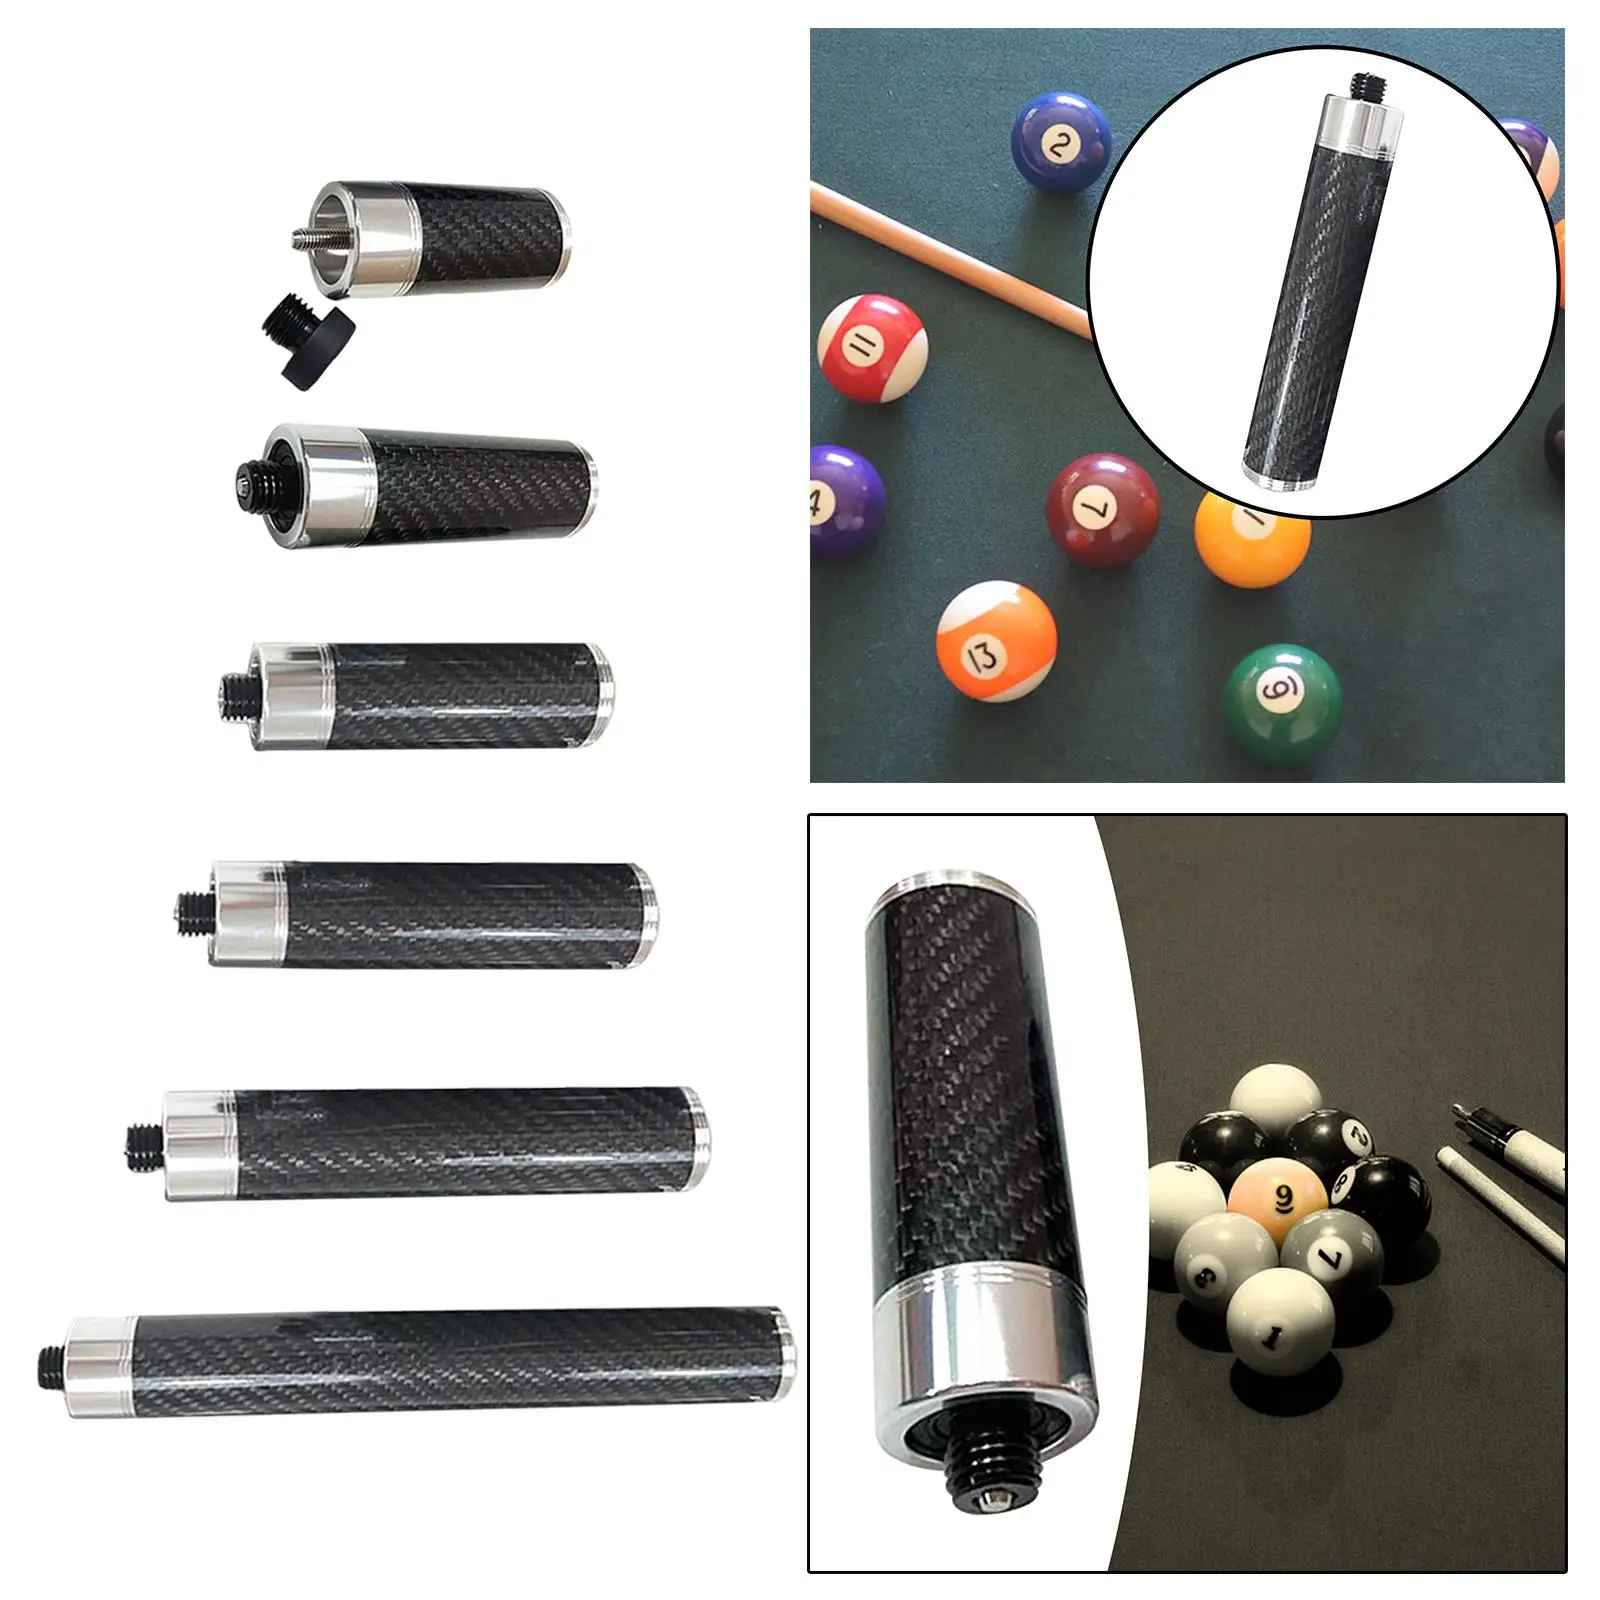 Billiards Pool Cue Extension Snooker Cue Extended Dia 1.3in Cue End Adapter with